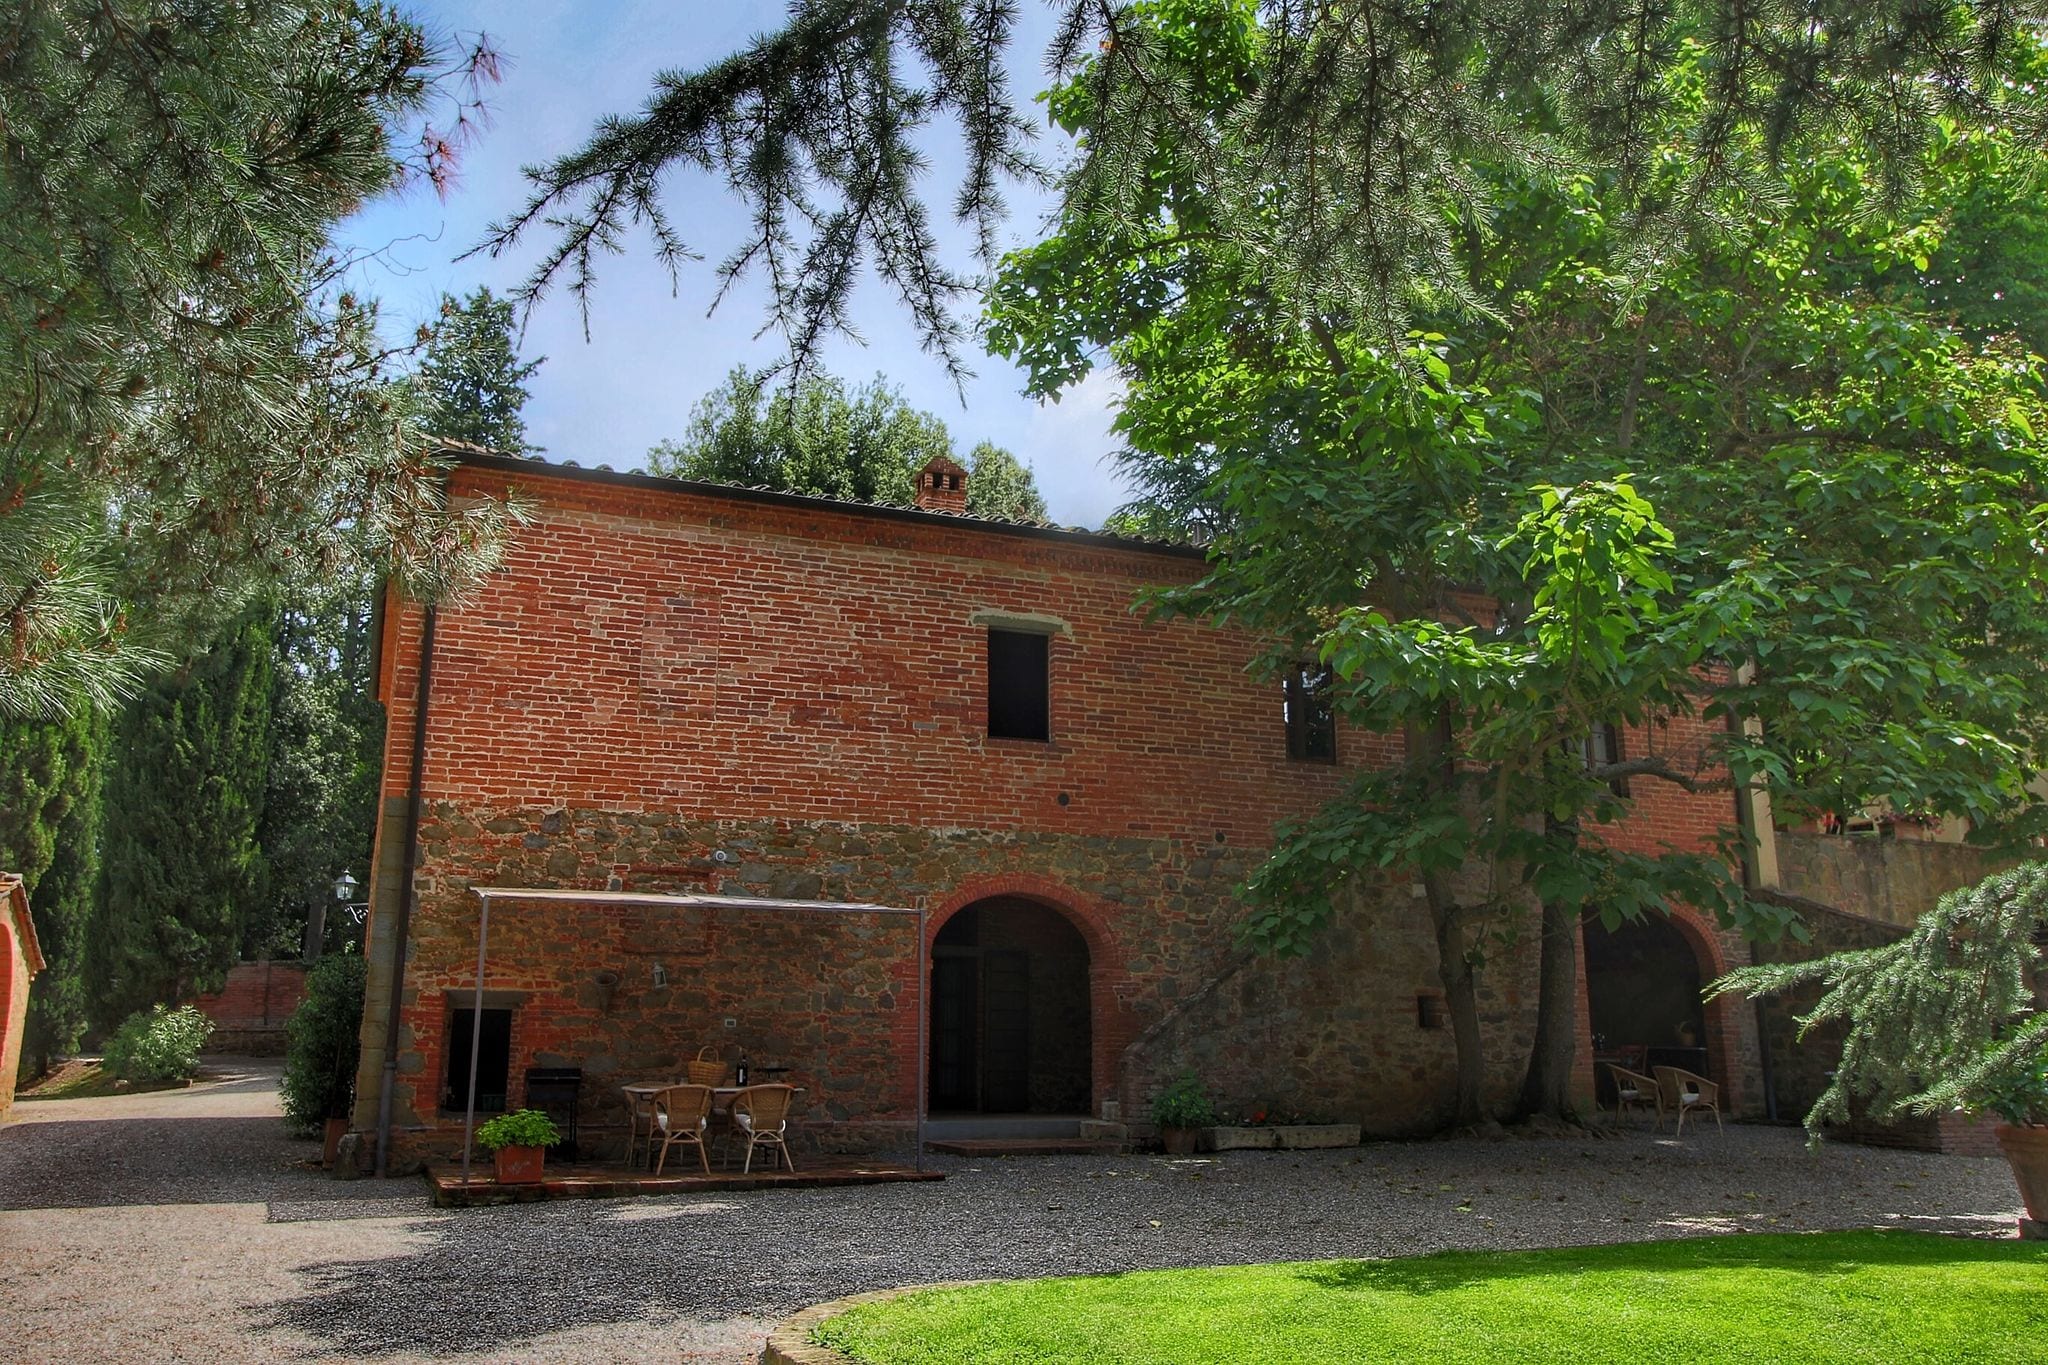 Estate with pool and tennis court in the Tuscan hills